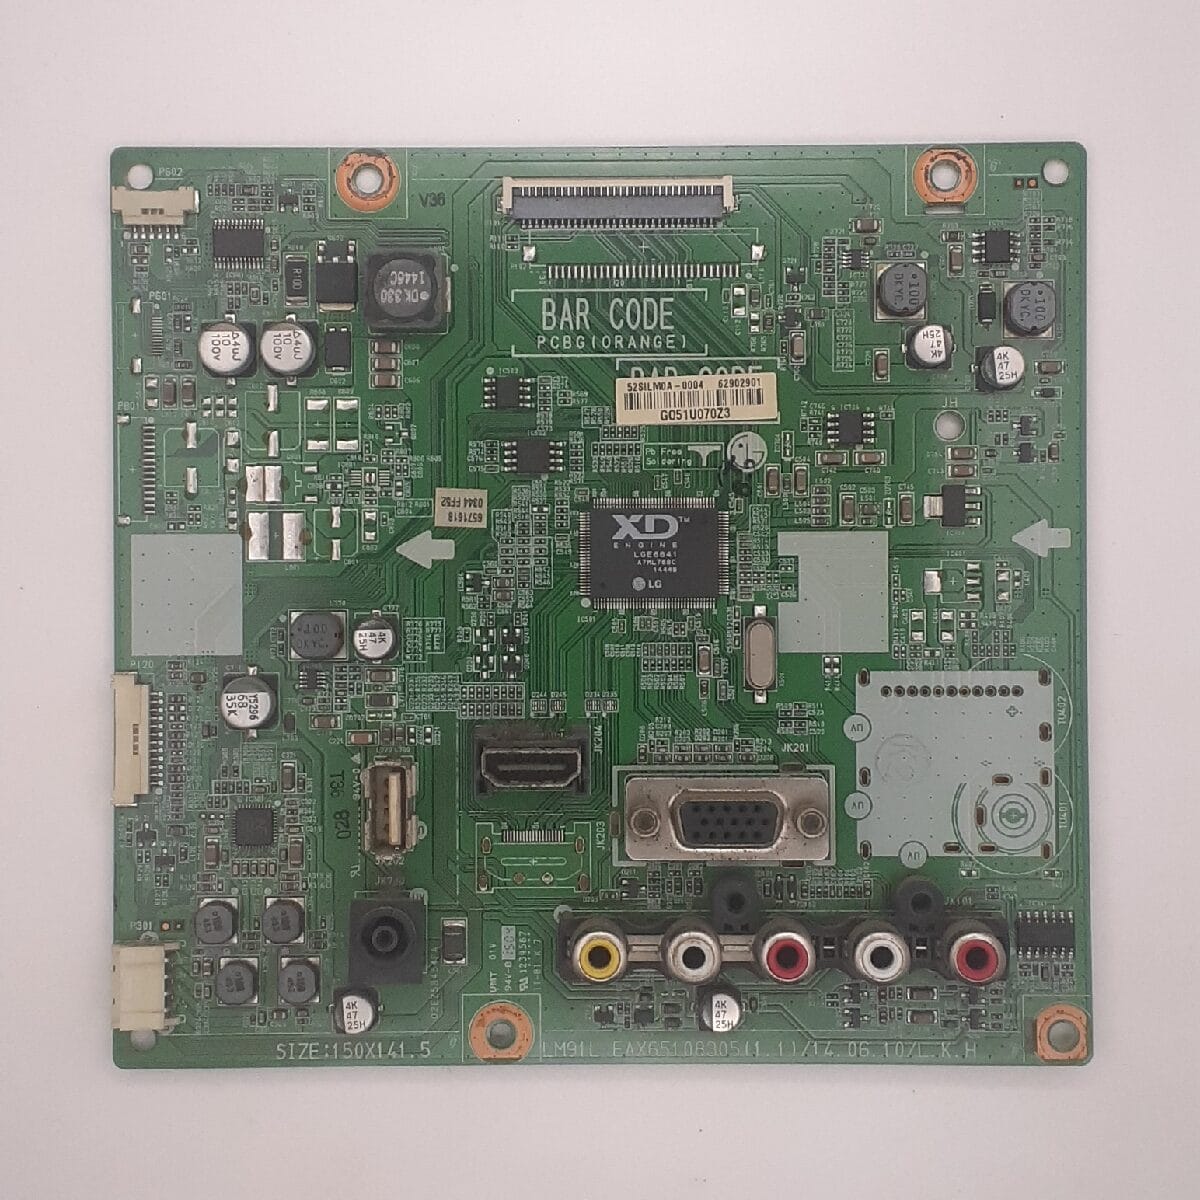 24MN33S LG MOTHERBOARD FOR LED TV